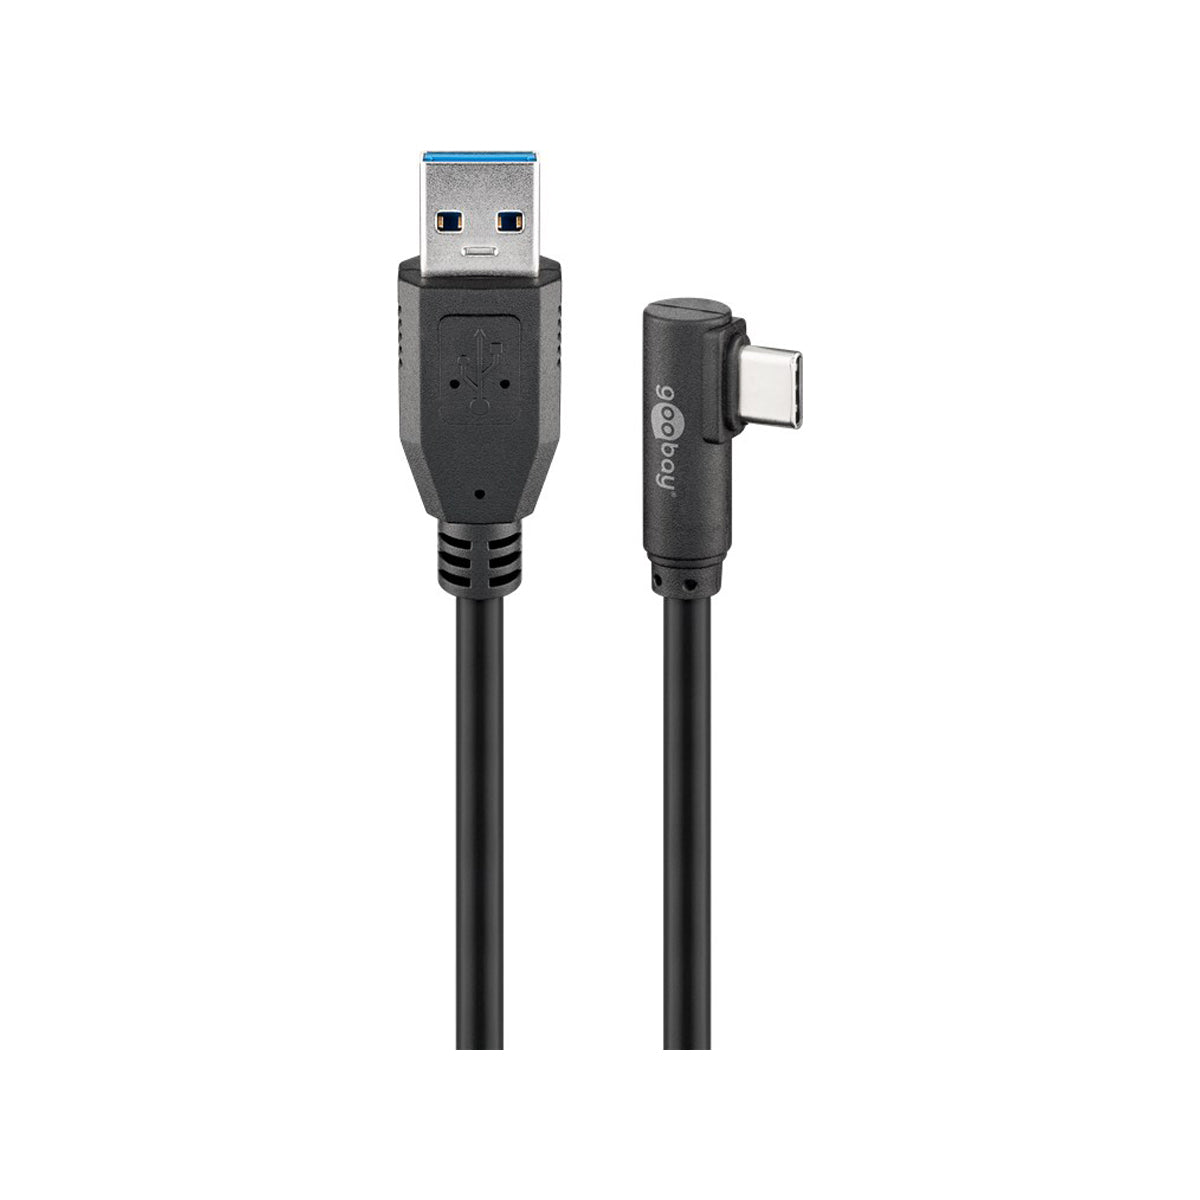 Goobay USB-C to USB A 3.0 Cable 0.5M for Mobiles - Black.